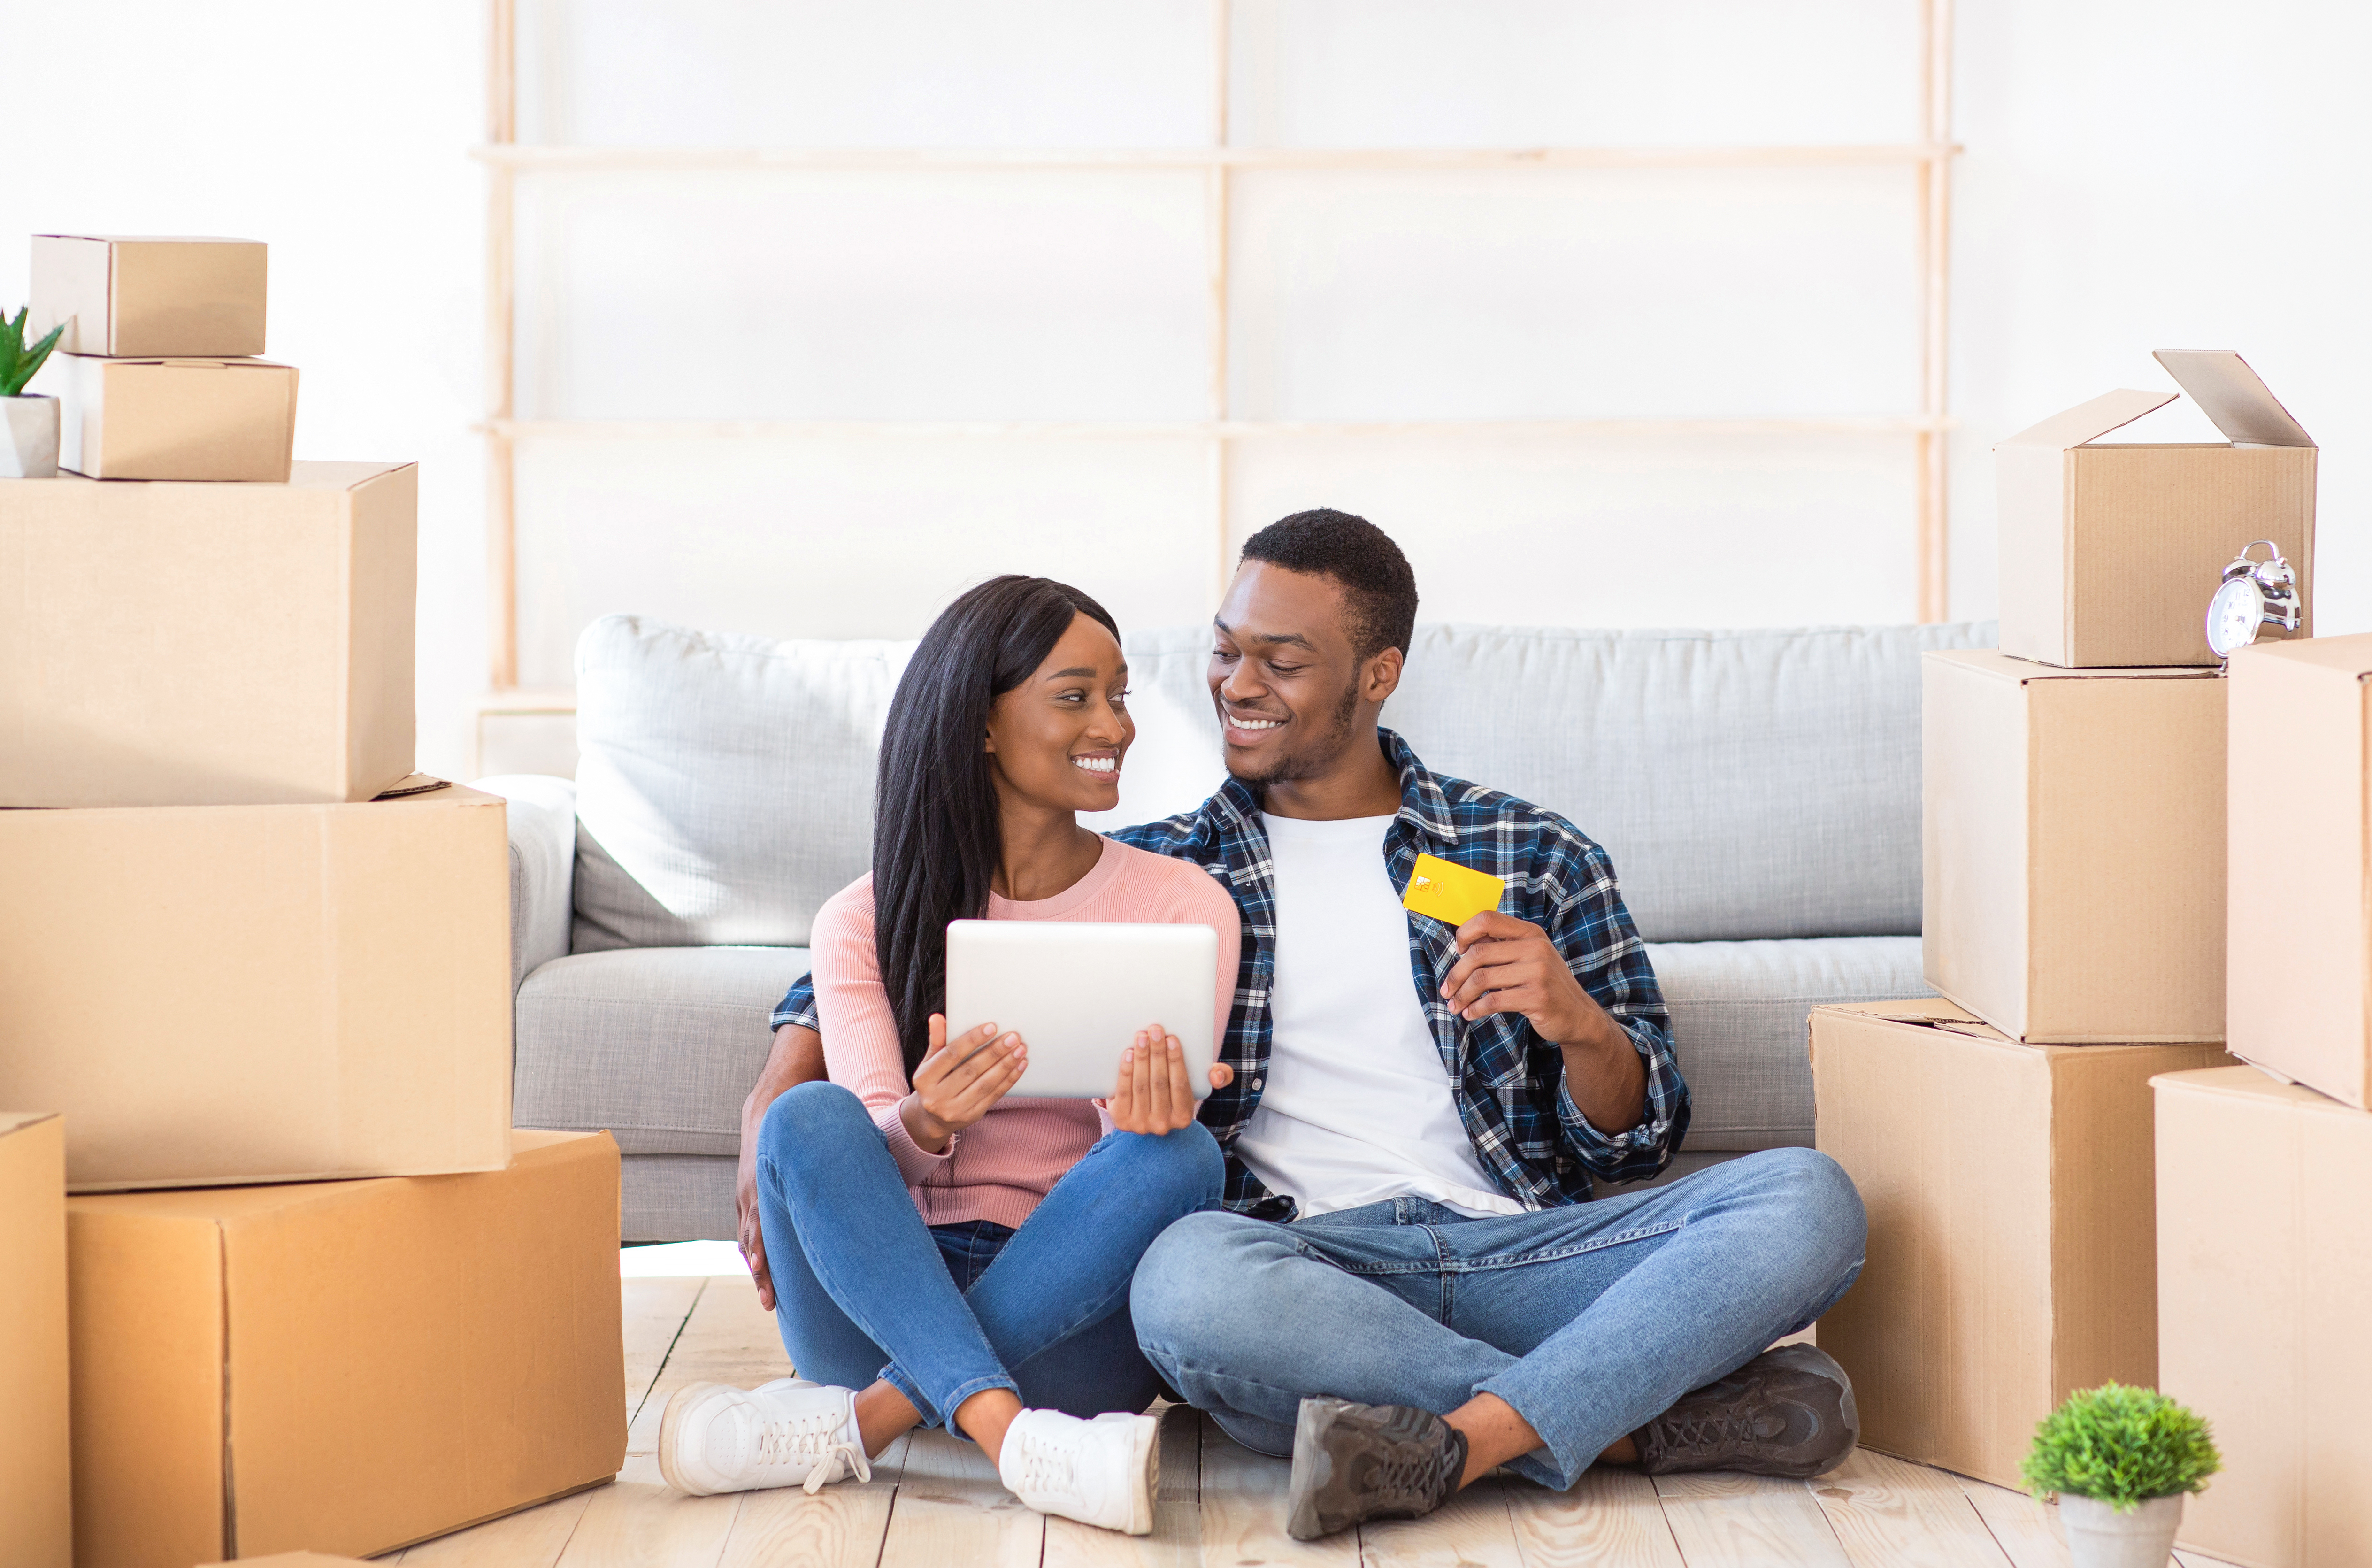 Man and woman sitting on the floor surrounded by boxes